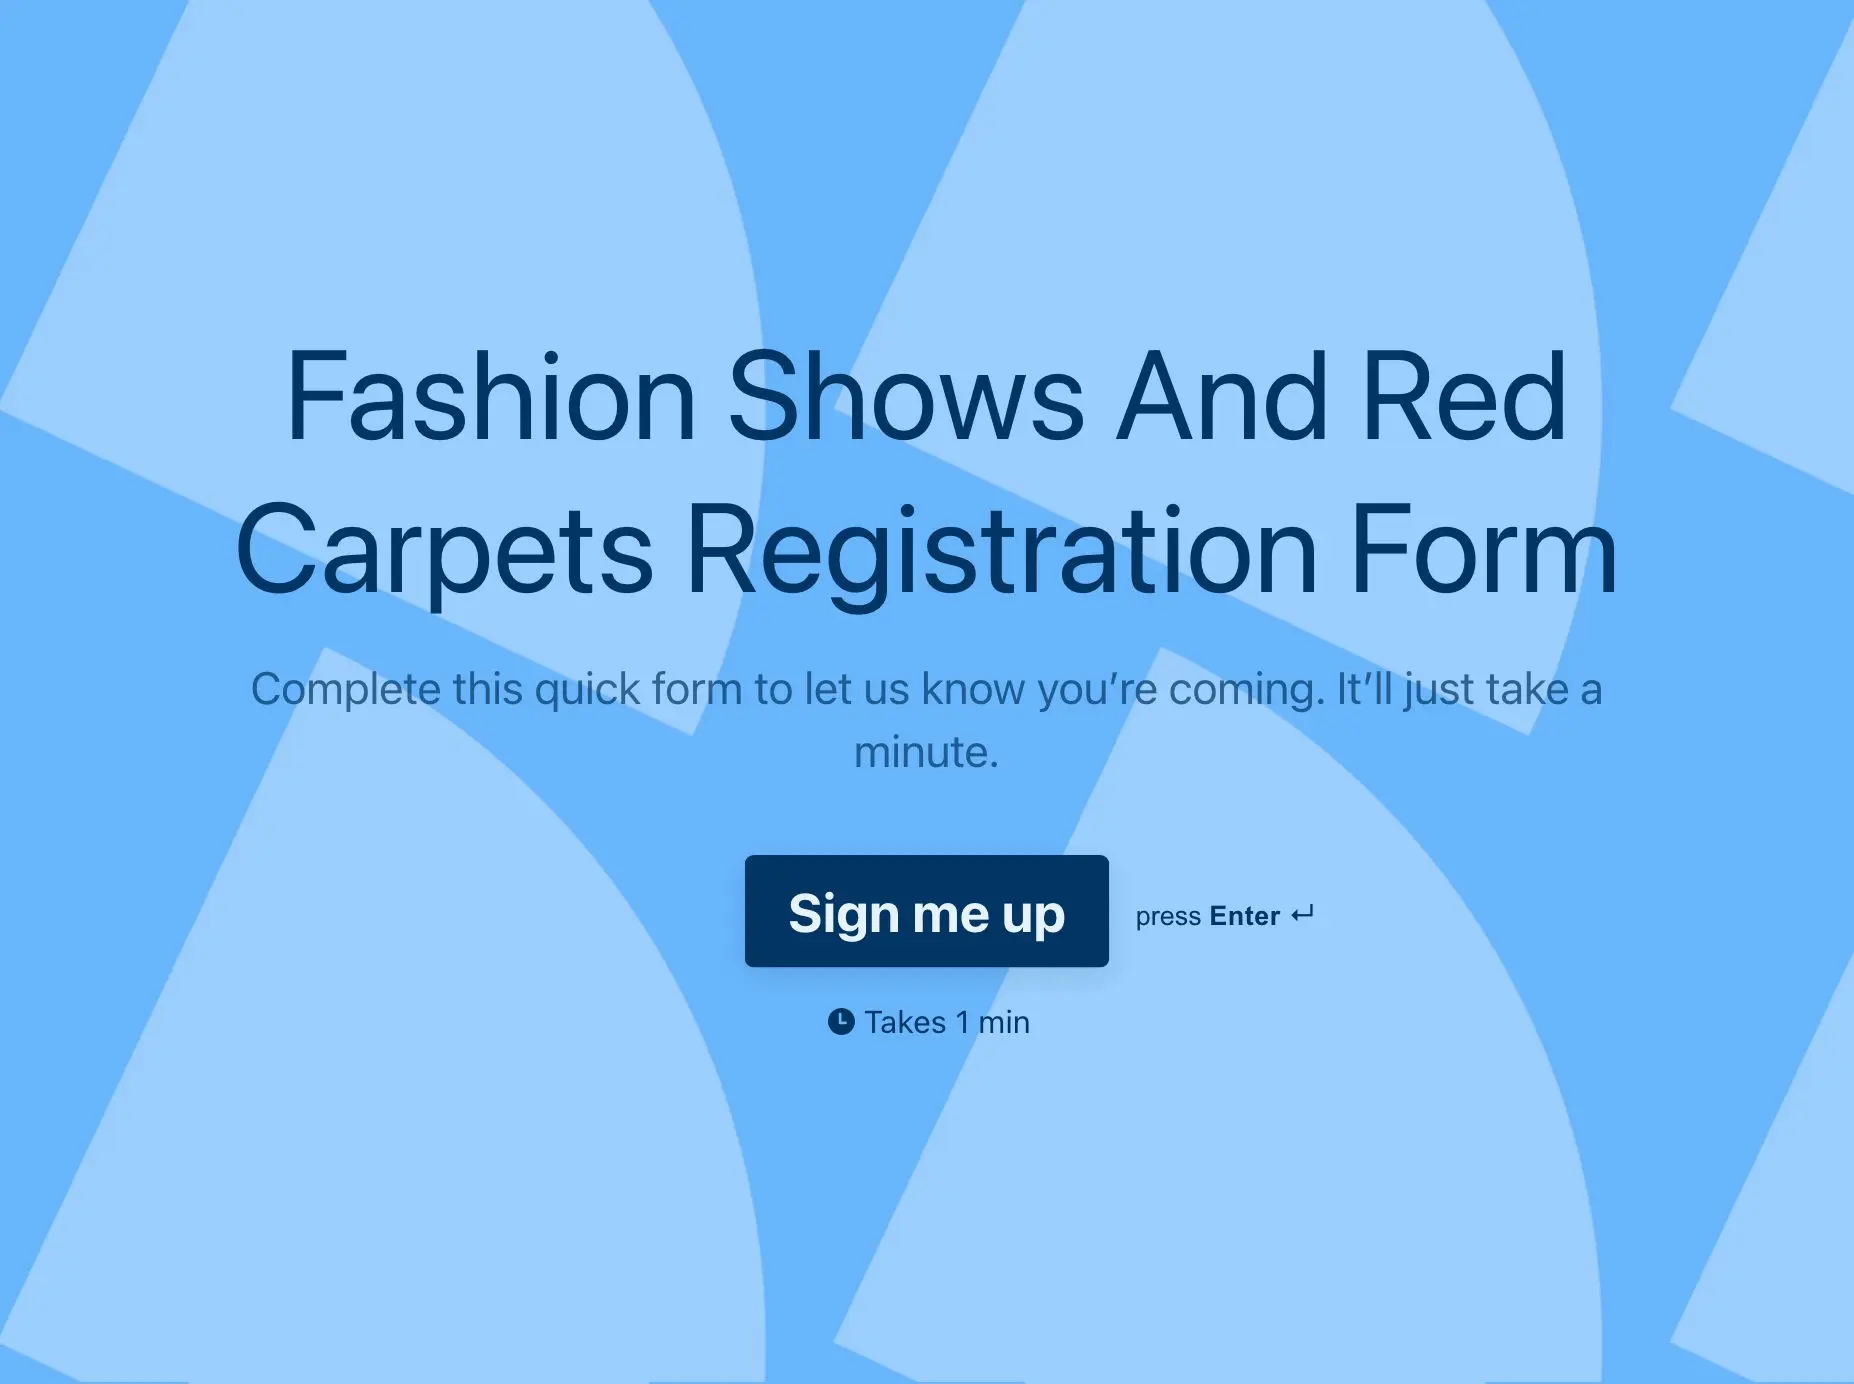 Fashion Shows And Red Carpets Registration Form Template Hero